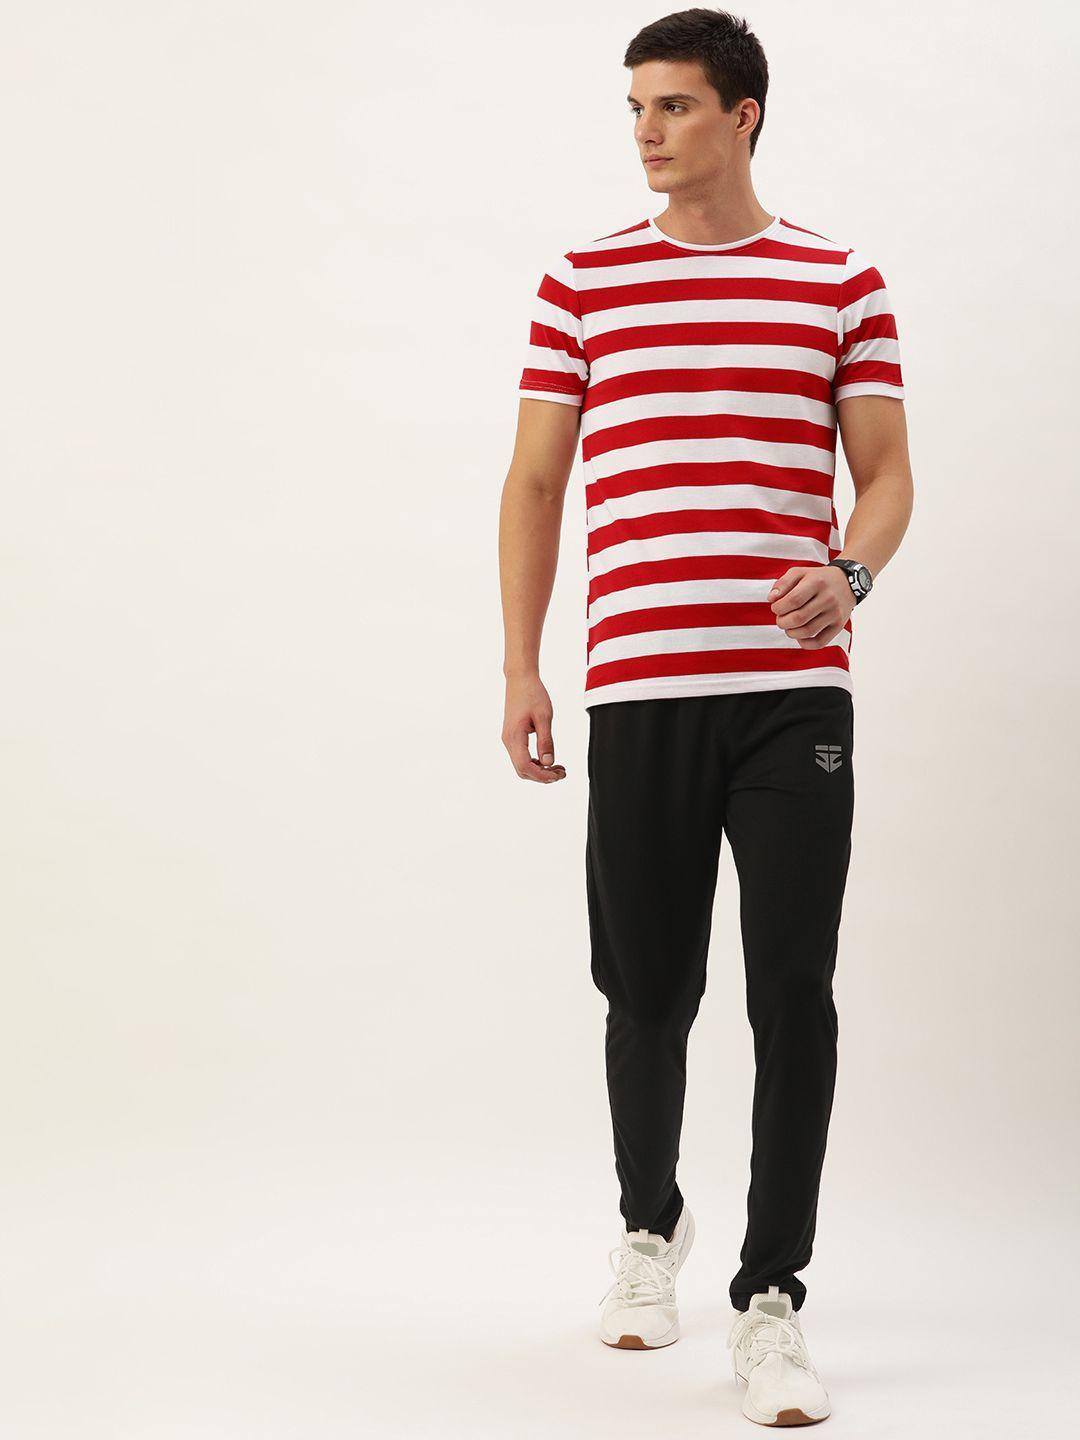 sports52 wear men striped round neck t-shirt with track pant sports tracksuit